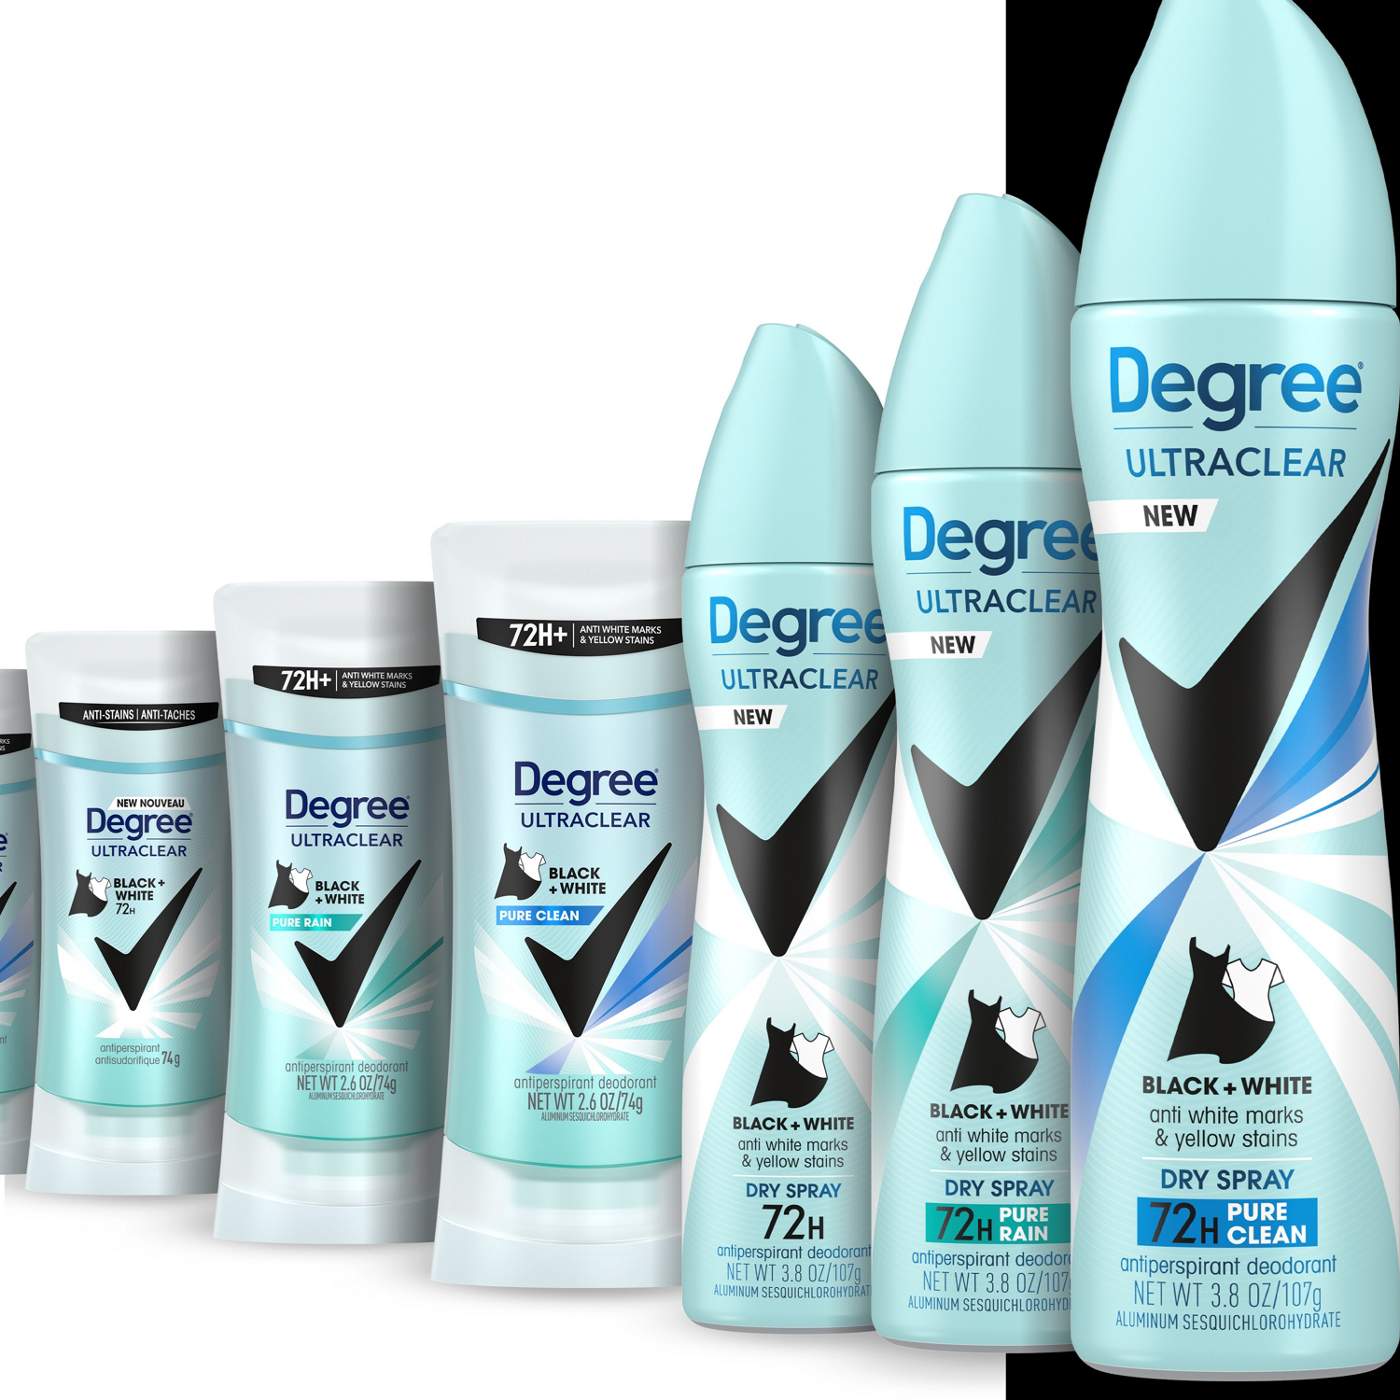 Degree Ultra Clear 72 Hr Antiperspirant Deodorant - Pure Clean; image 7 of 7